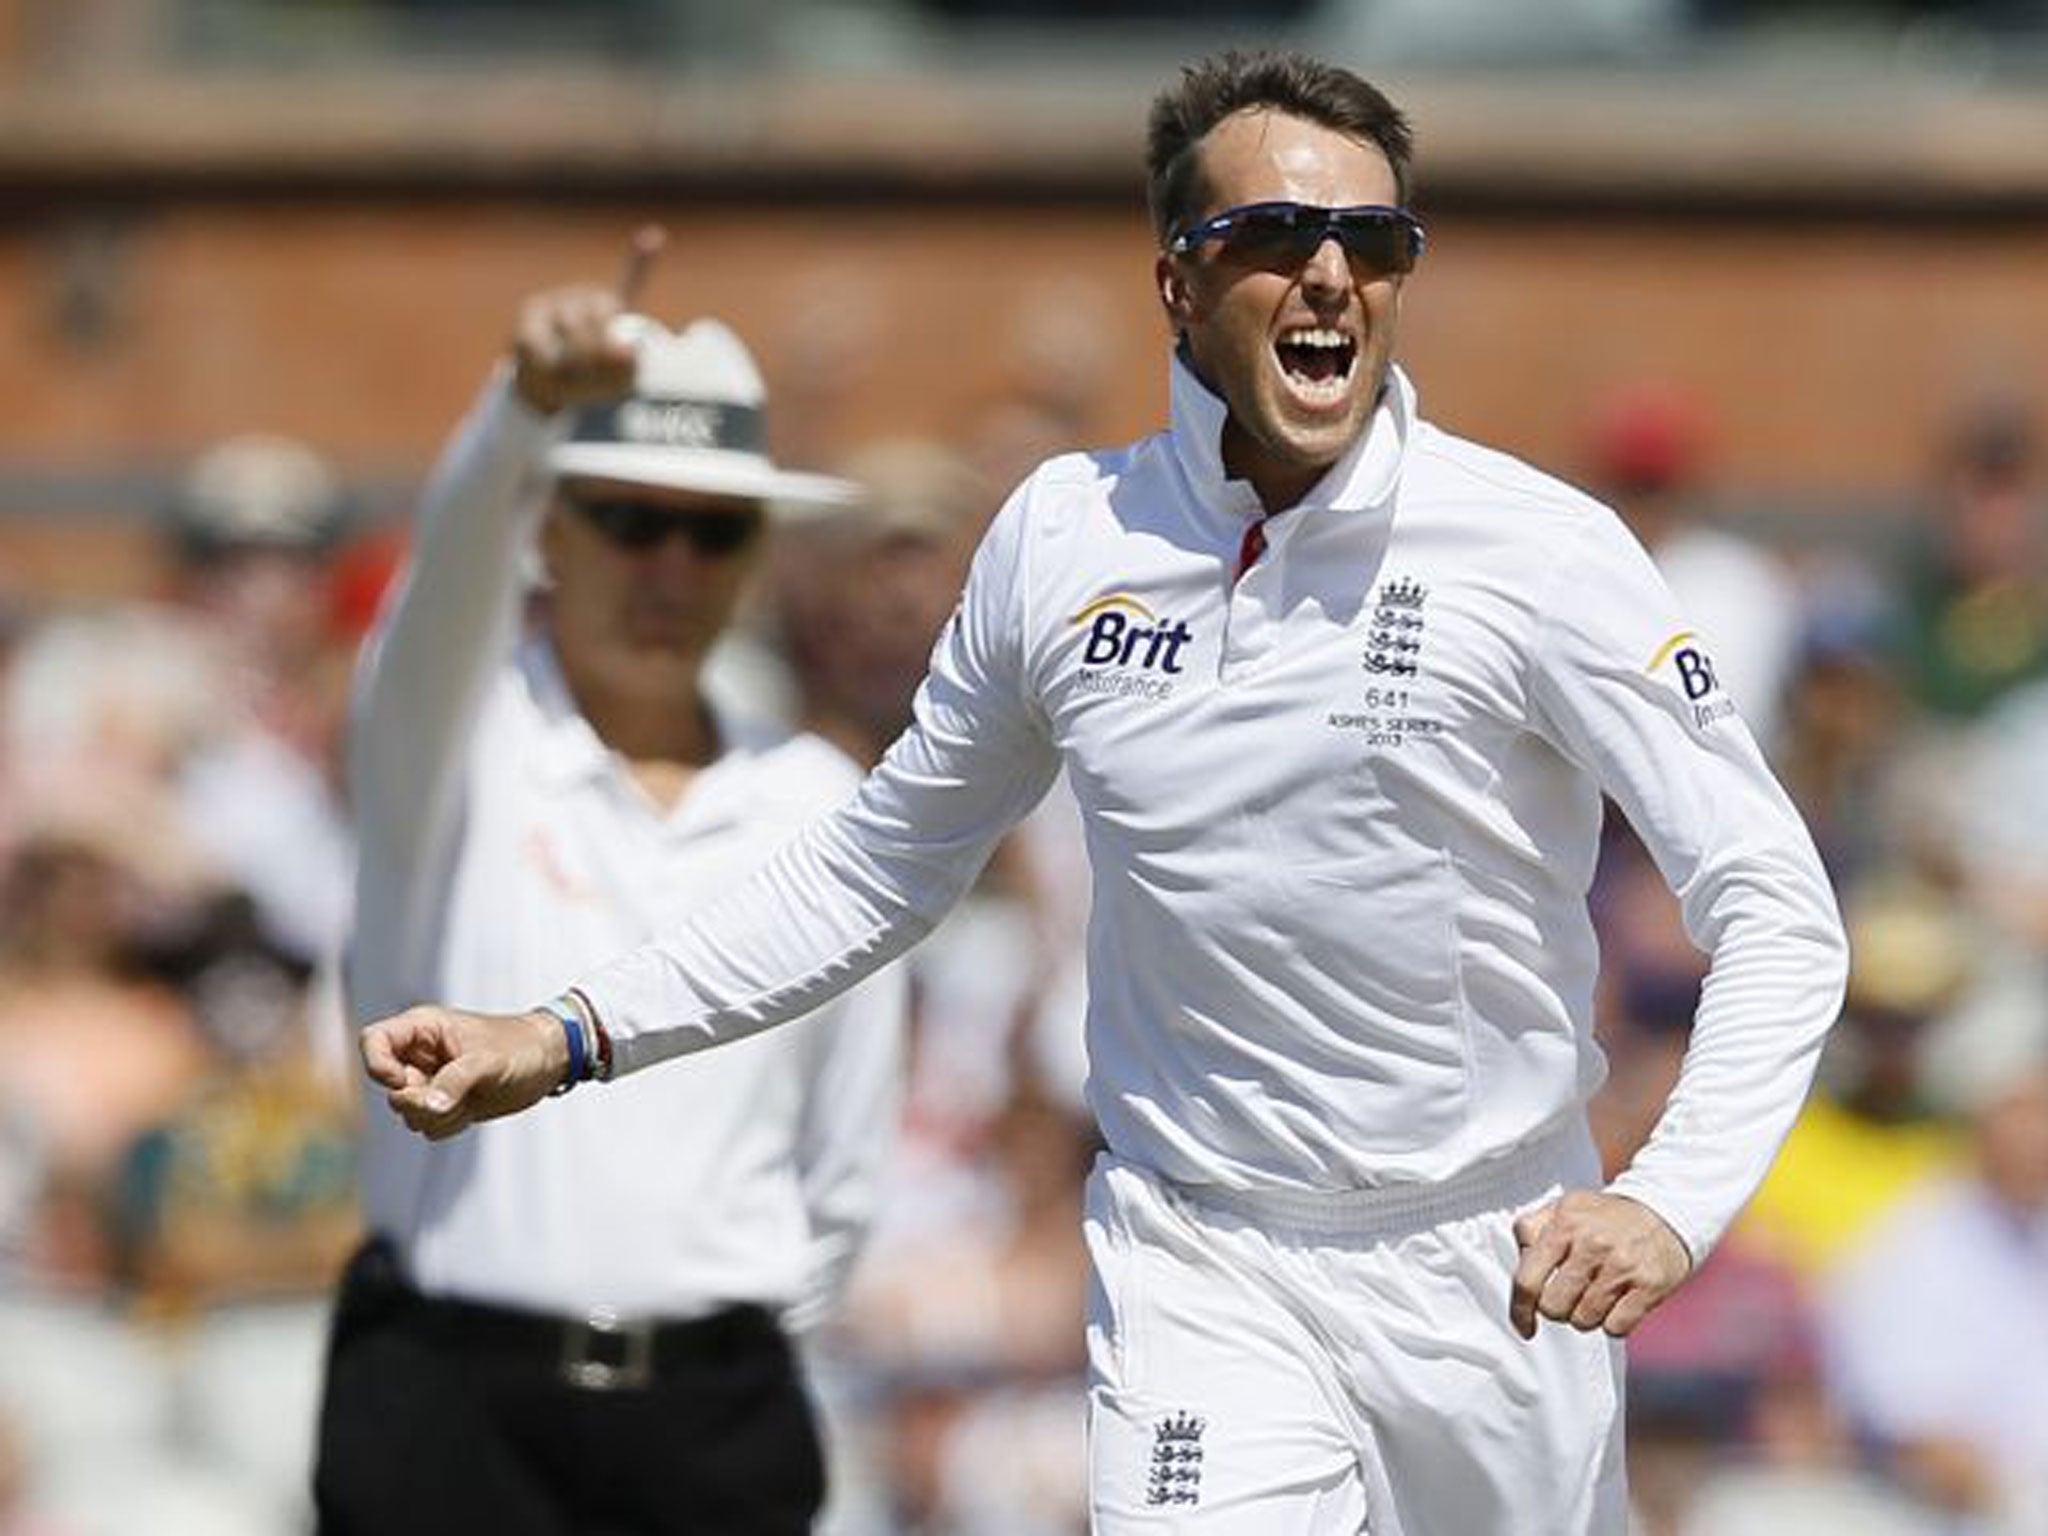 Graeme Swann says England can build a lead then win